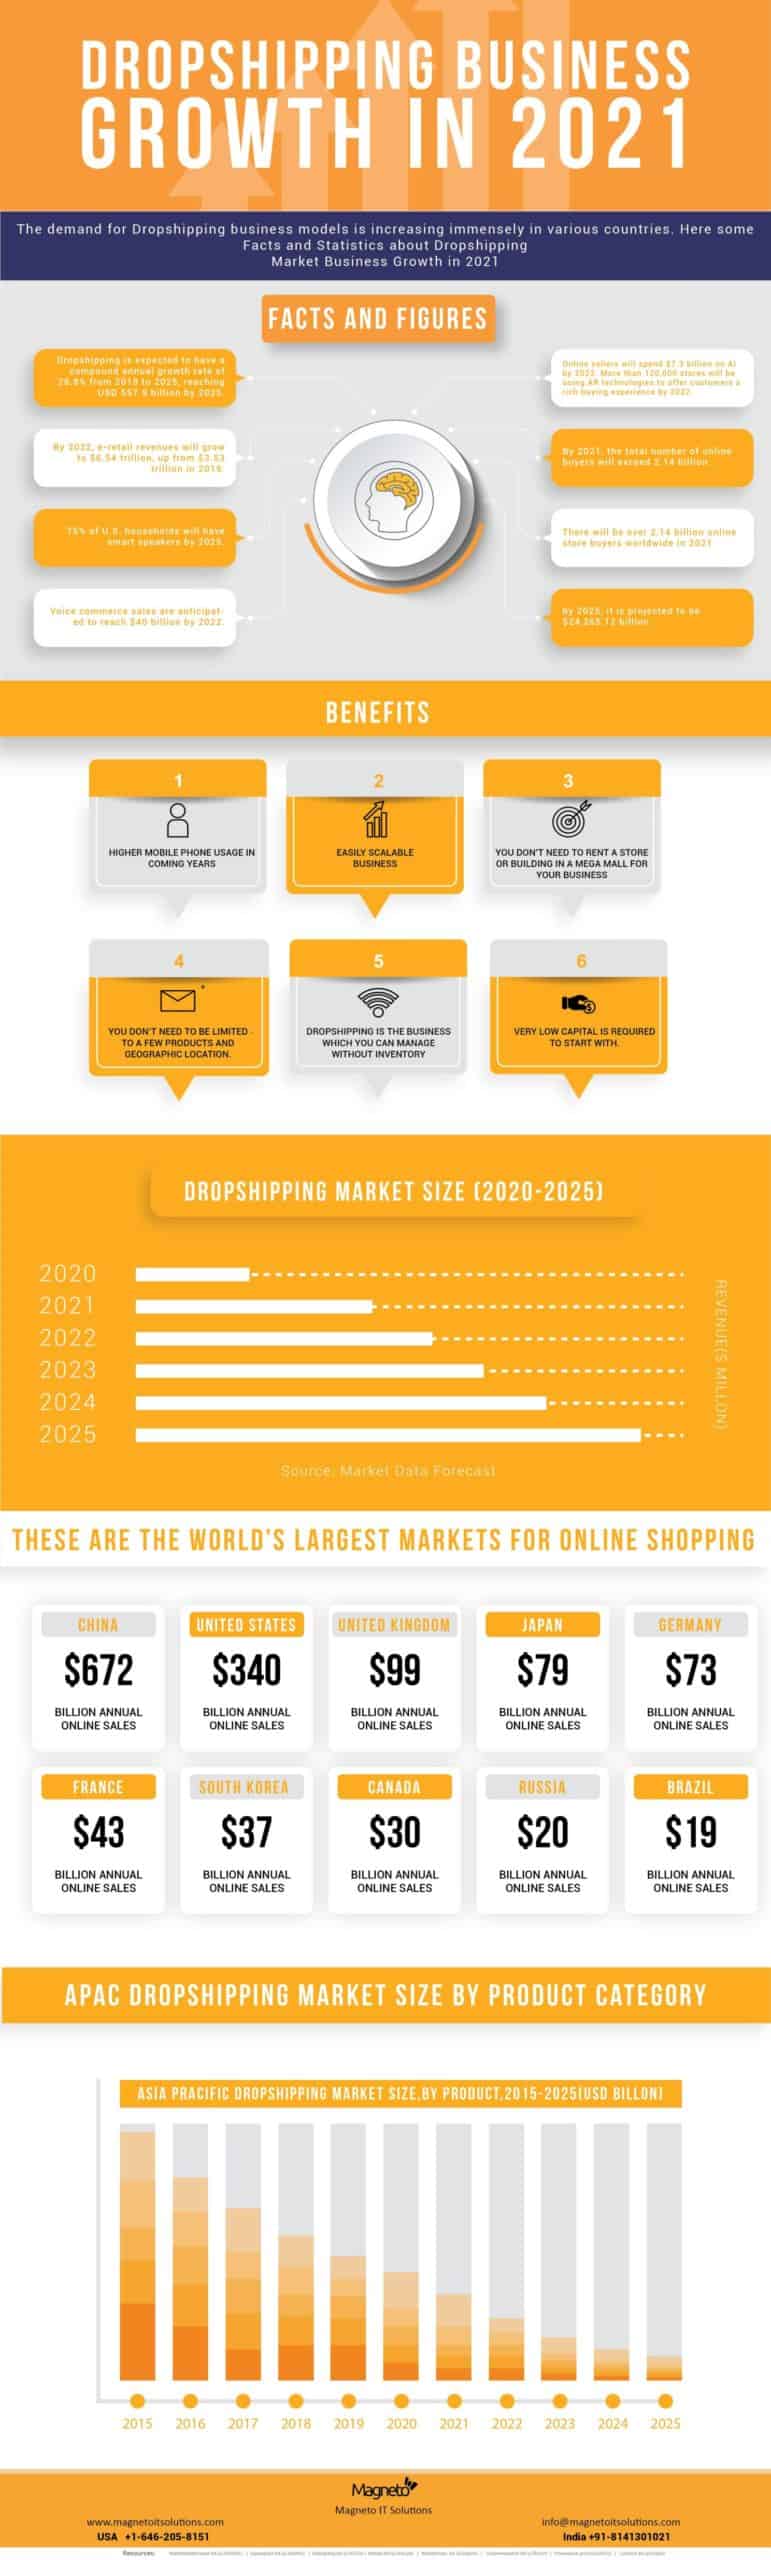 Dropshipping Business Growth in 2021 Infographic